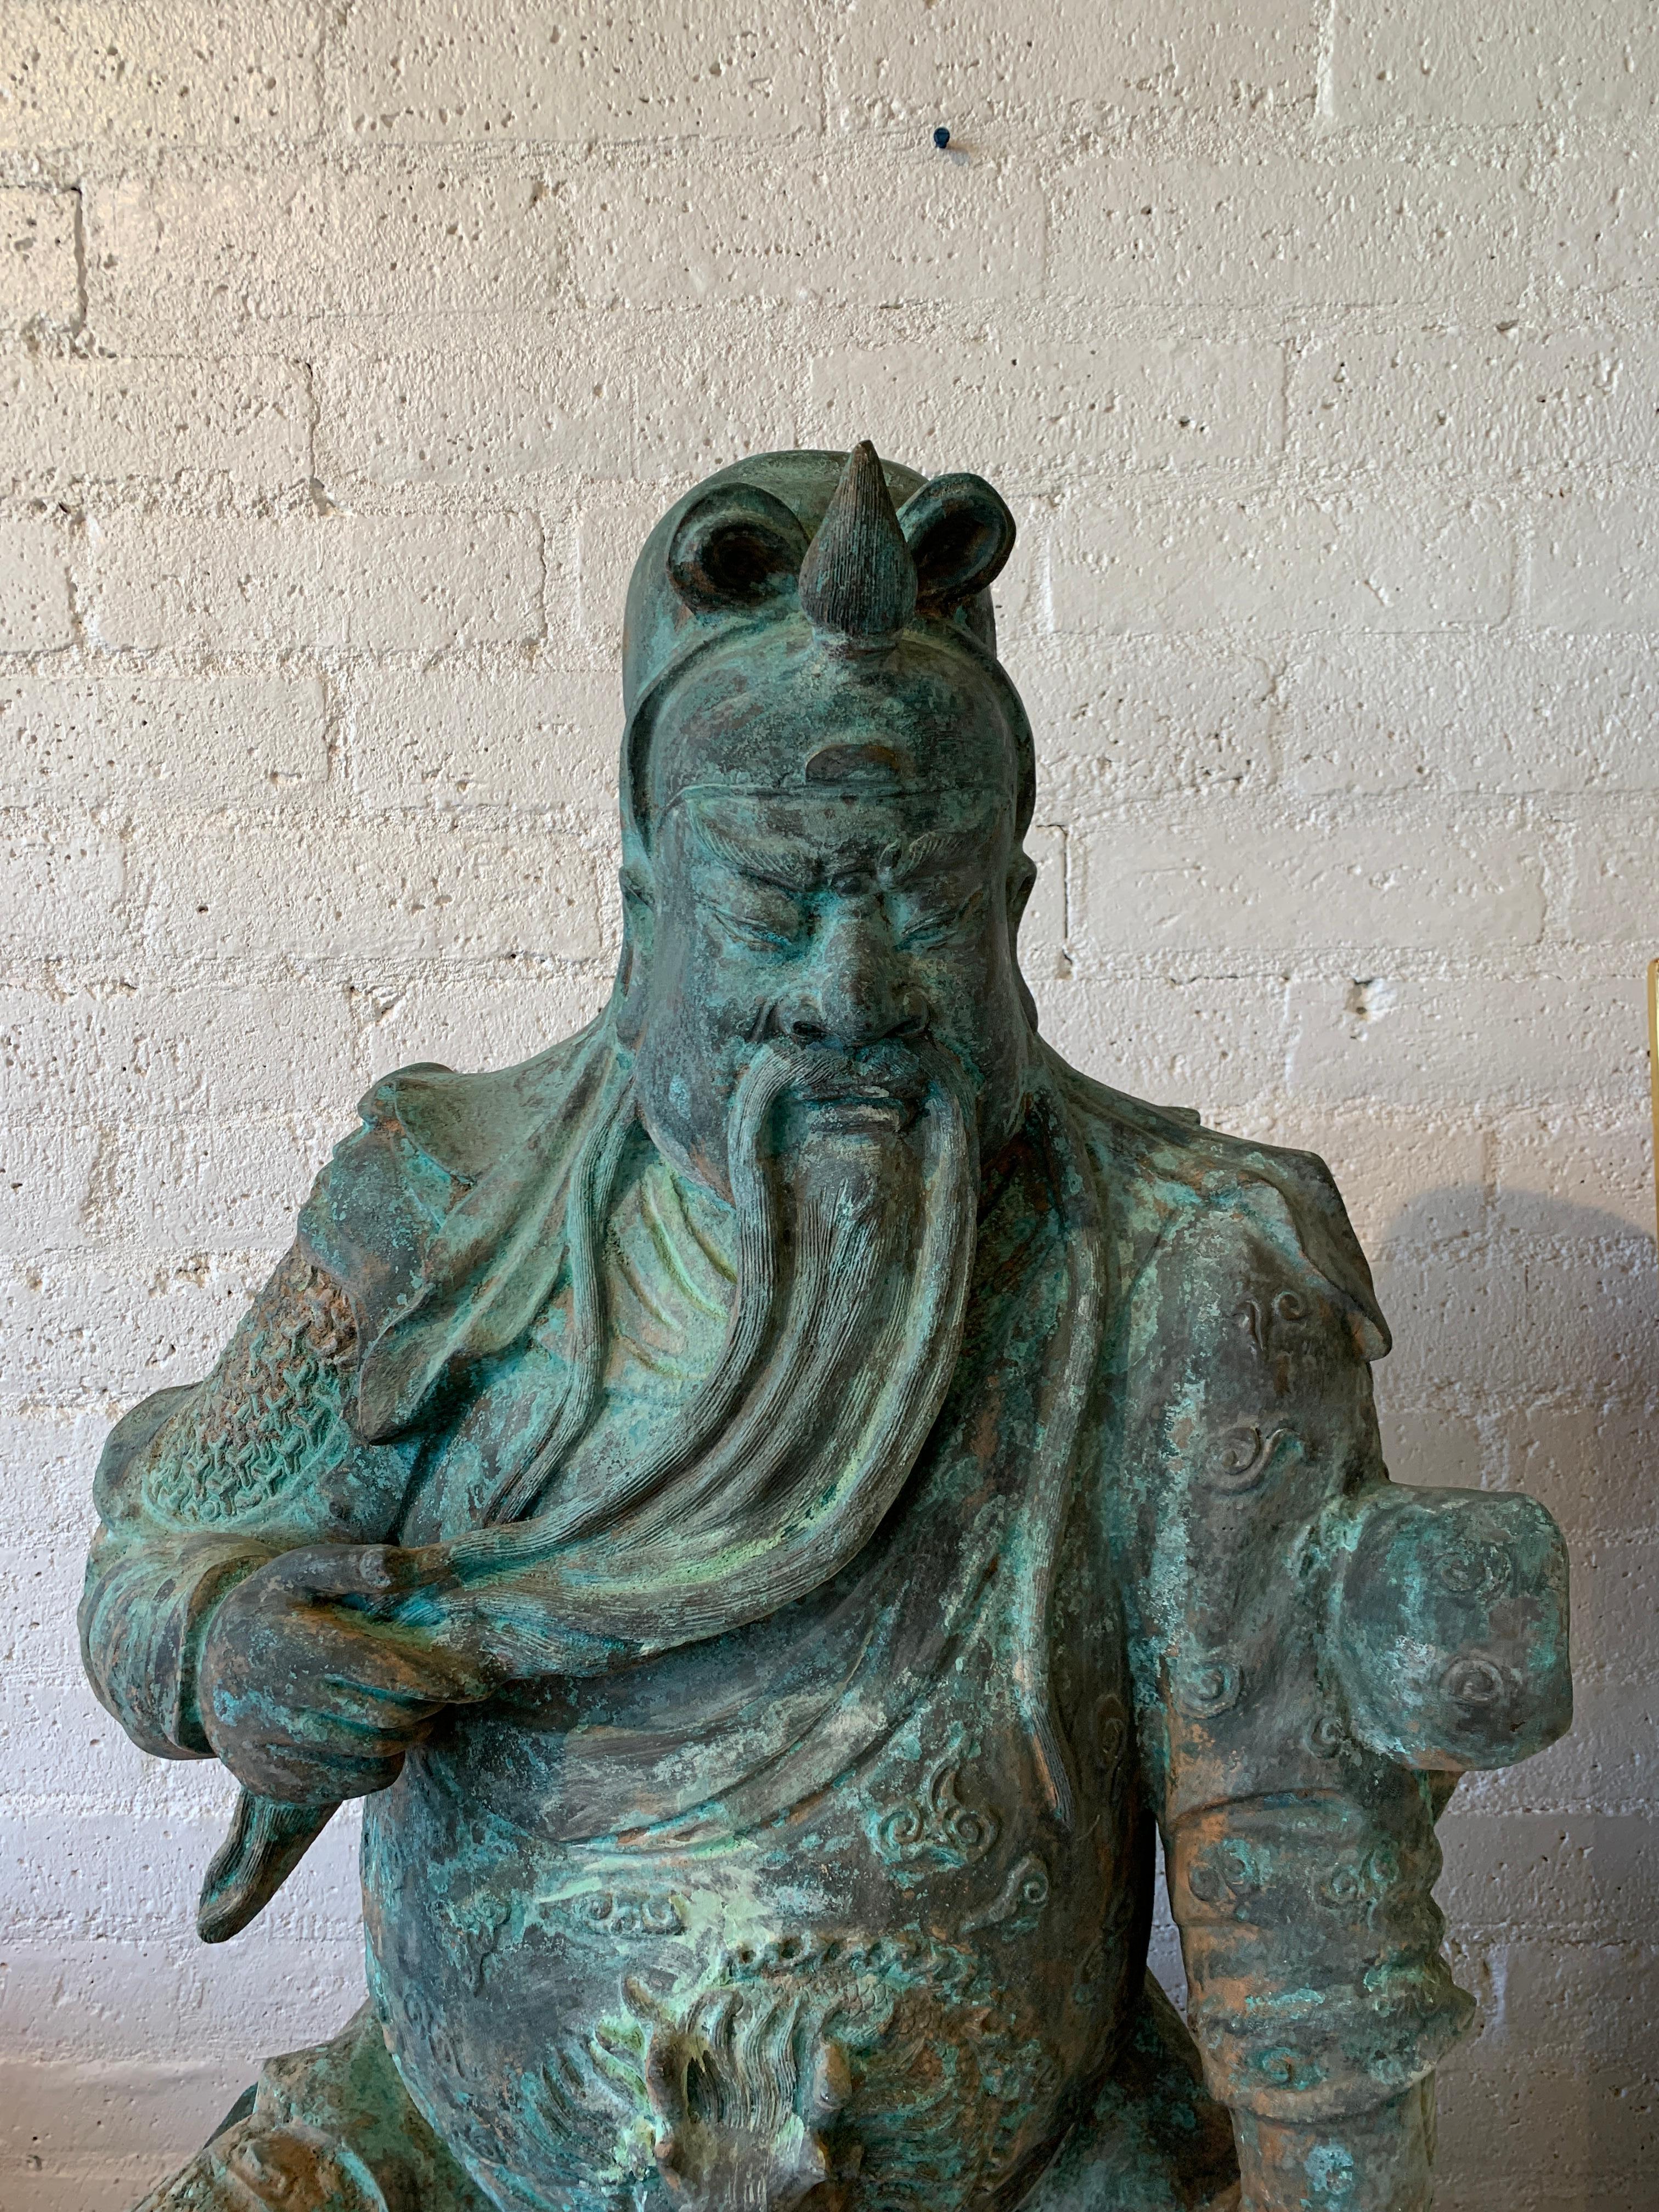 A massive larger than life size bronze seated figure of Guan Yu one of the most documented figures in Asian history. It has been sitting in a garden and has fabulous greenish patina. Nice detail and scale. In good condition with some imperfections